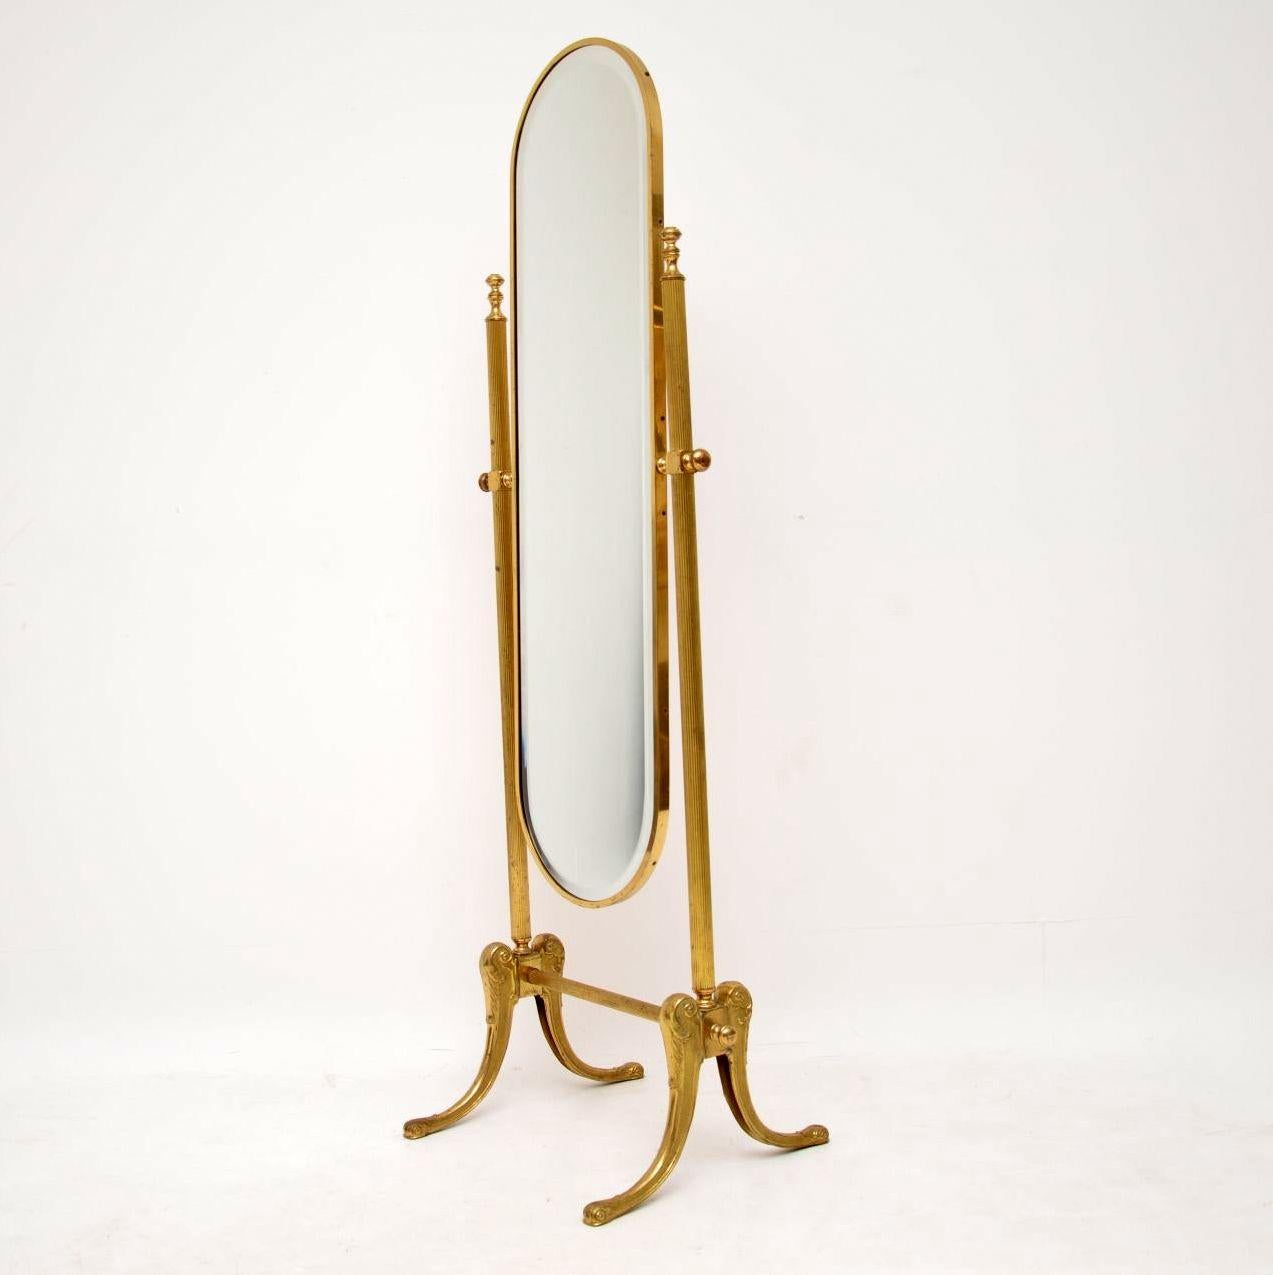 Antique French style brass cheval mirror in good original condition. This piece has a full length bevelled brass framed mirror which sits on a brass framework. The mirror can be adjusted to any angle with the help of brass side handles. The brass